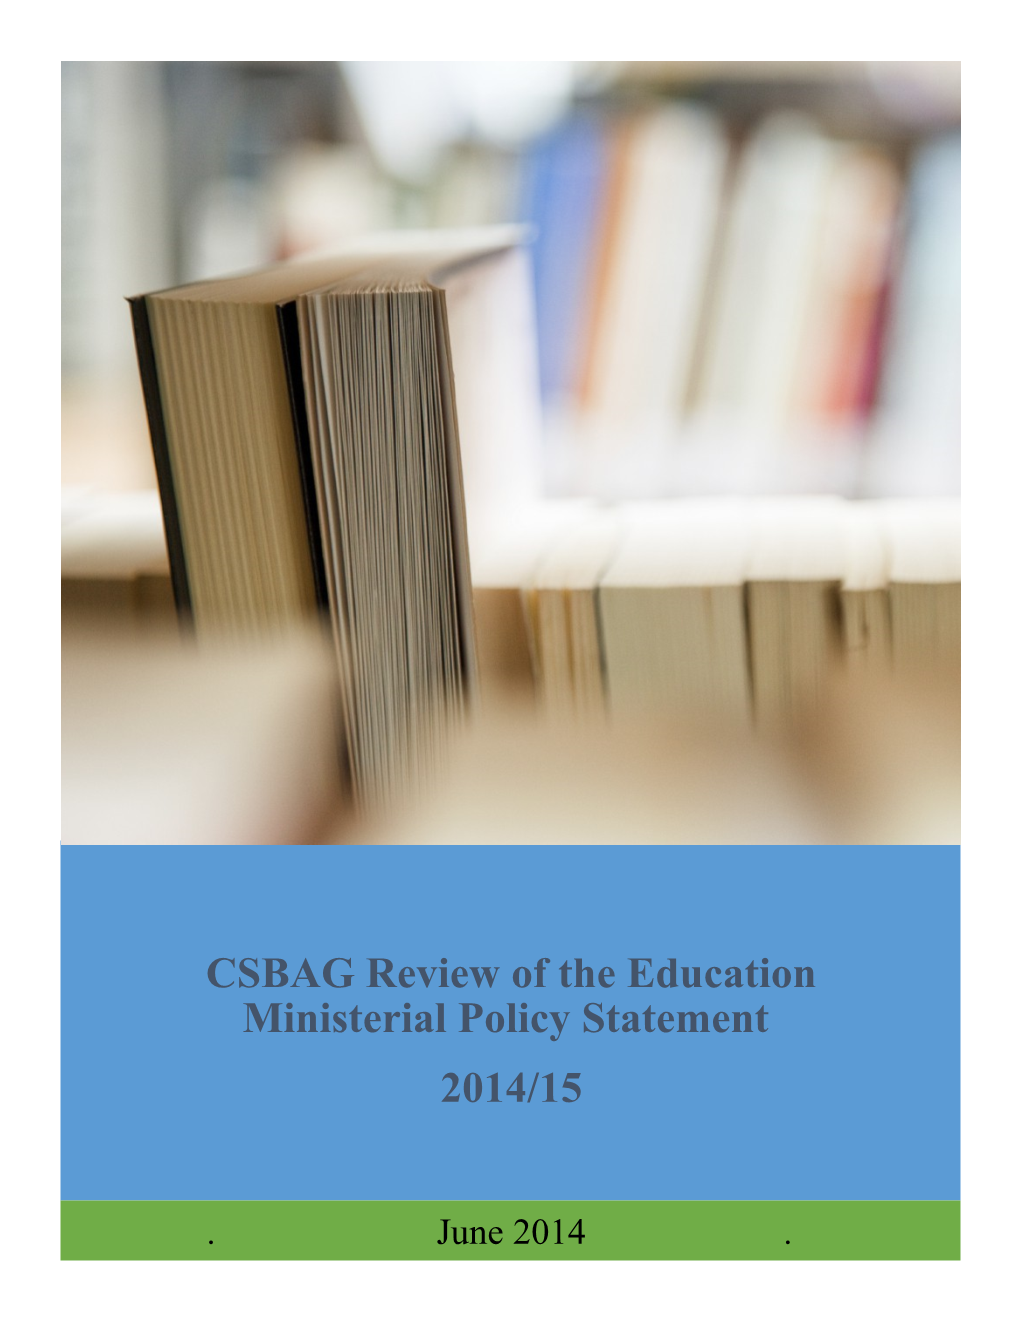 CSBAG Review of the Education Ministerial Policy Statement